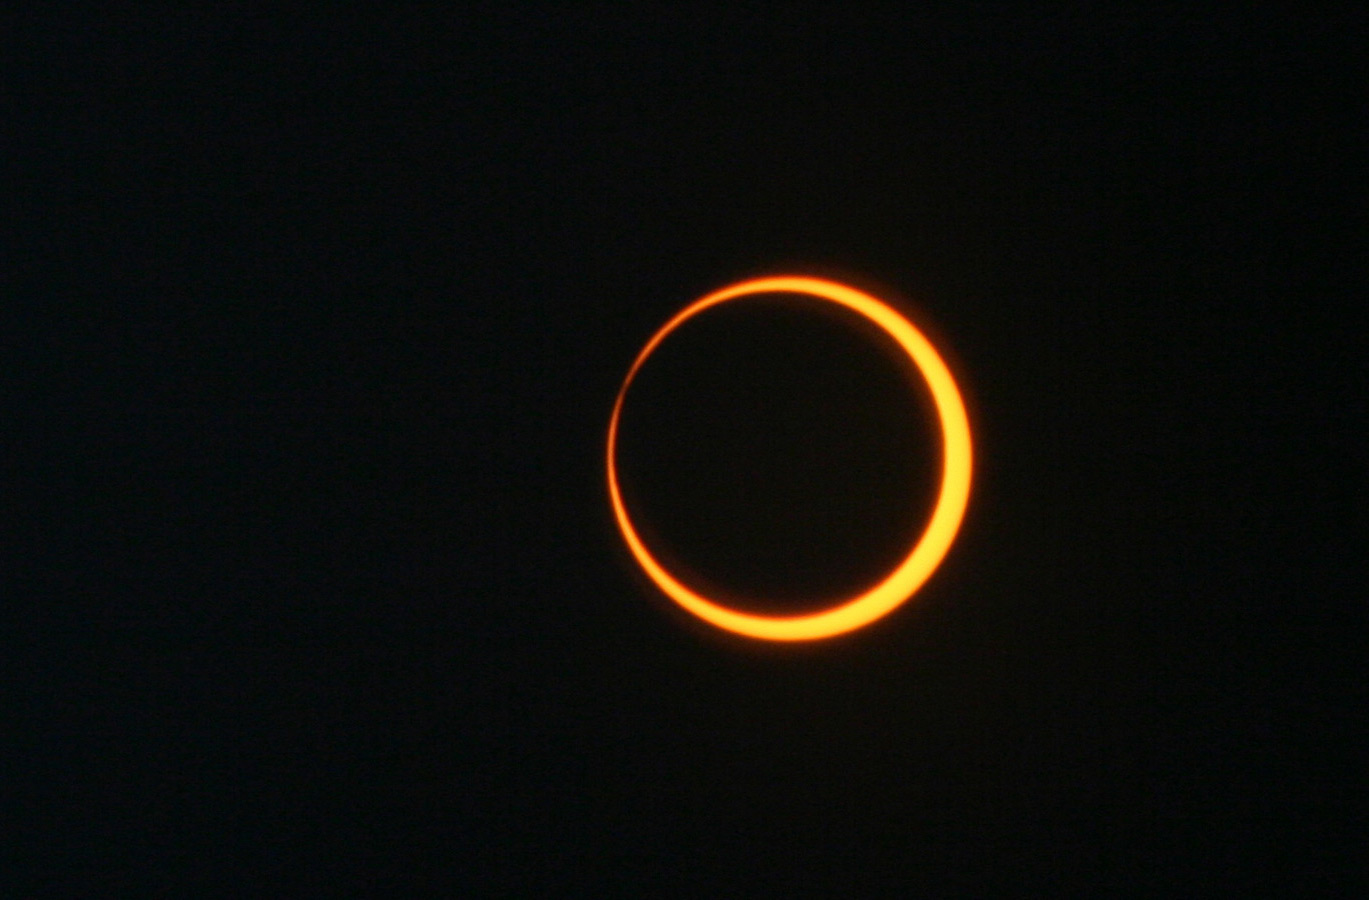 Pa.’s chance to see partial ring-of-fire solar eclipse today is all but zero